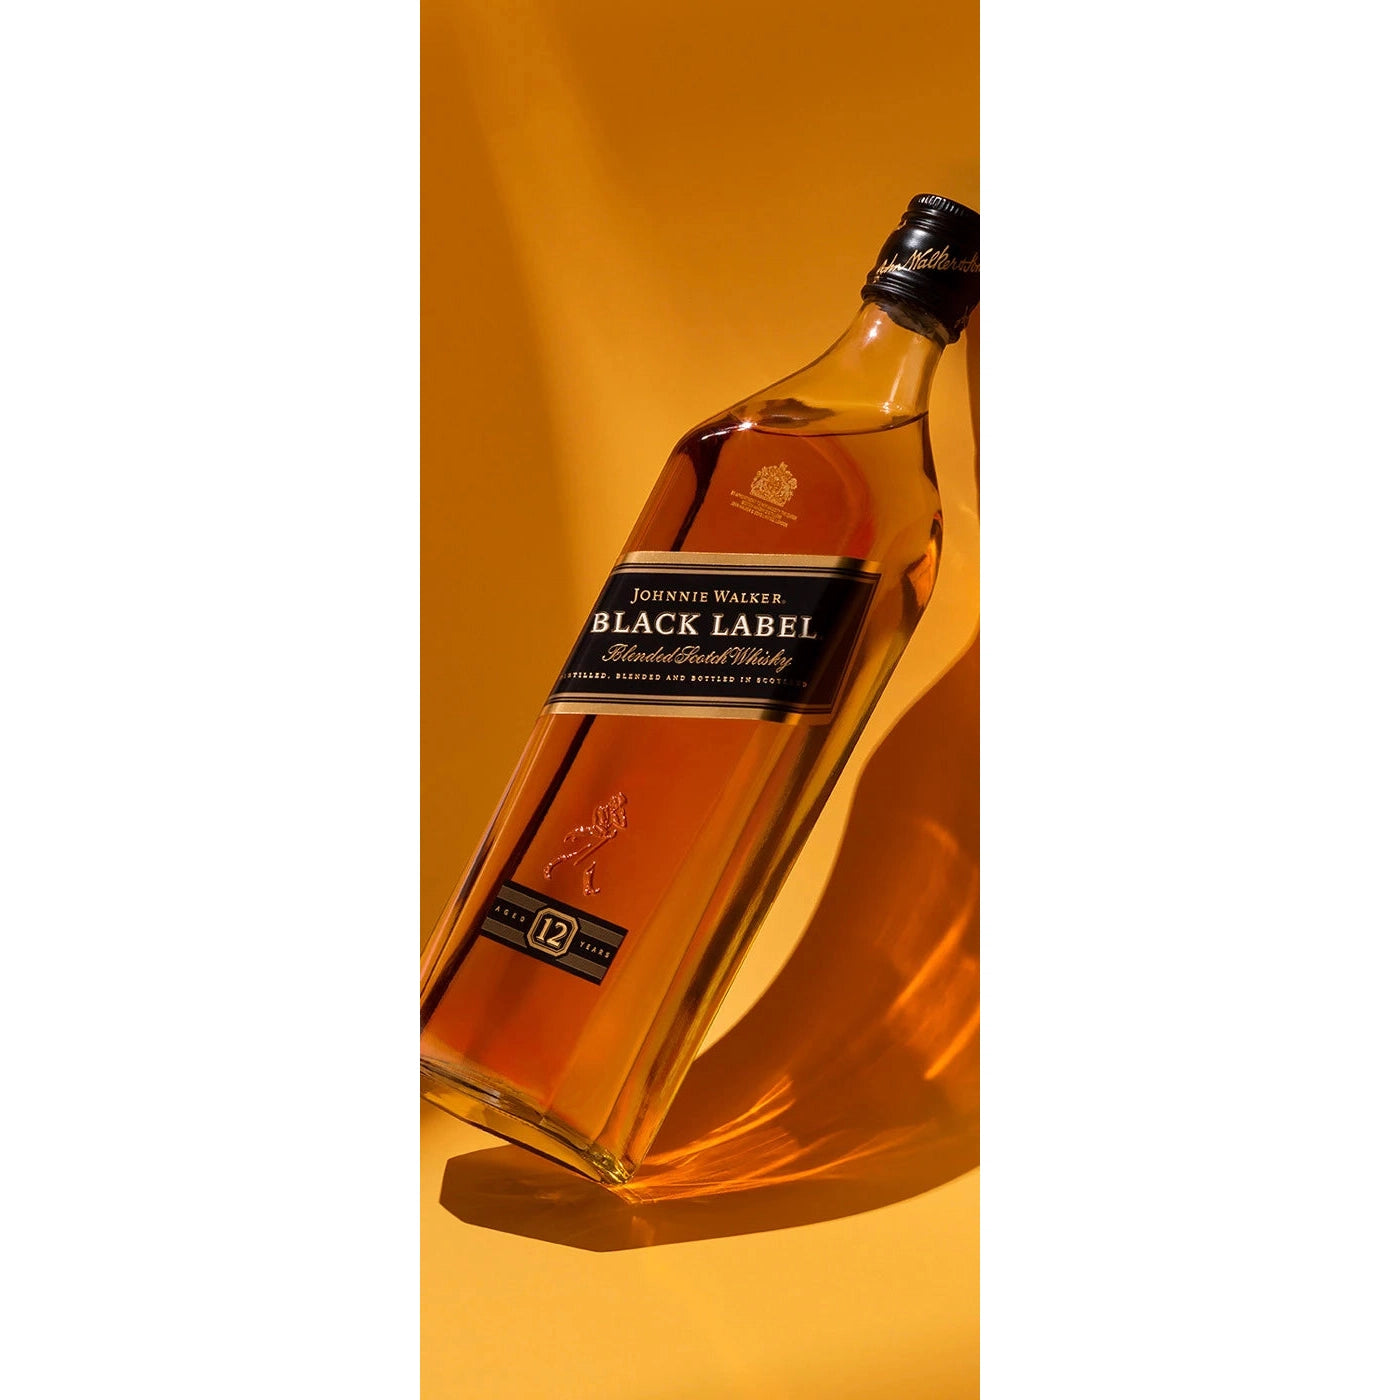 Johnnie Walker Black Label-Deluxe Whisky / Imported Whisky-5000267024233-Fountainhall Wines